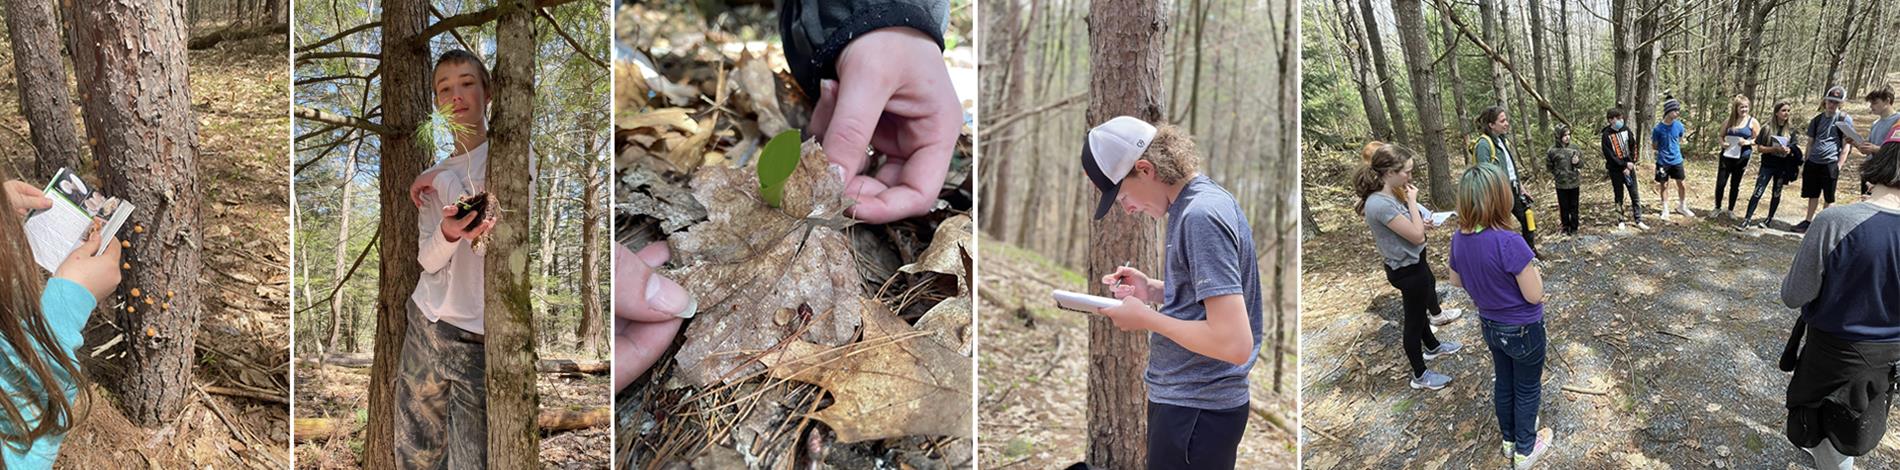 Several photos of middle school students in a science class taking notes and working outdoors